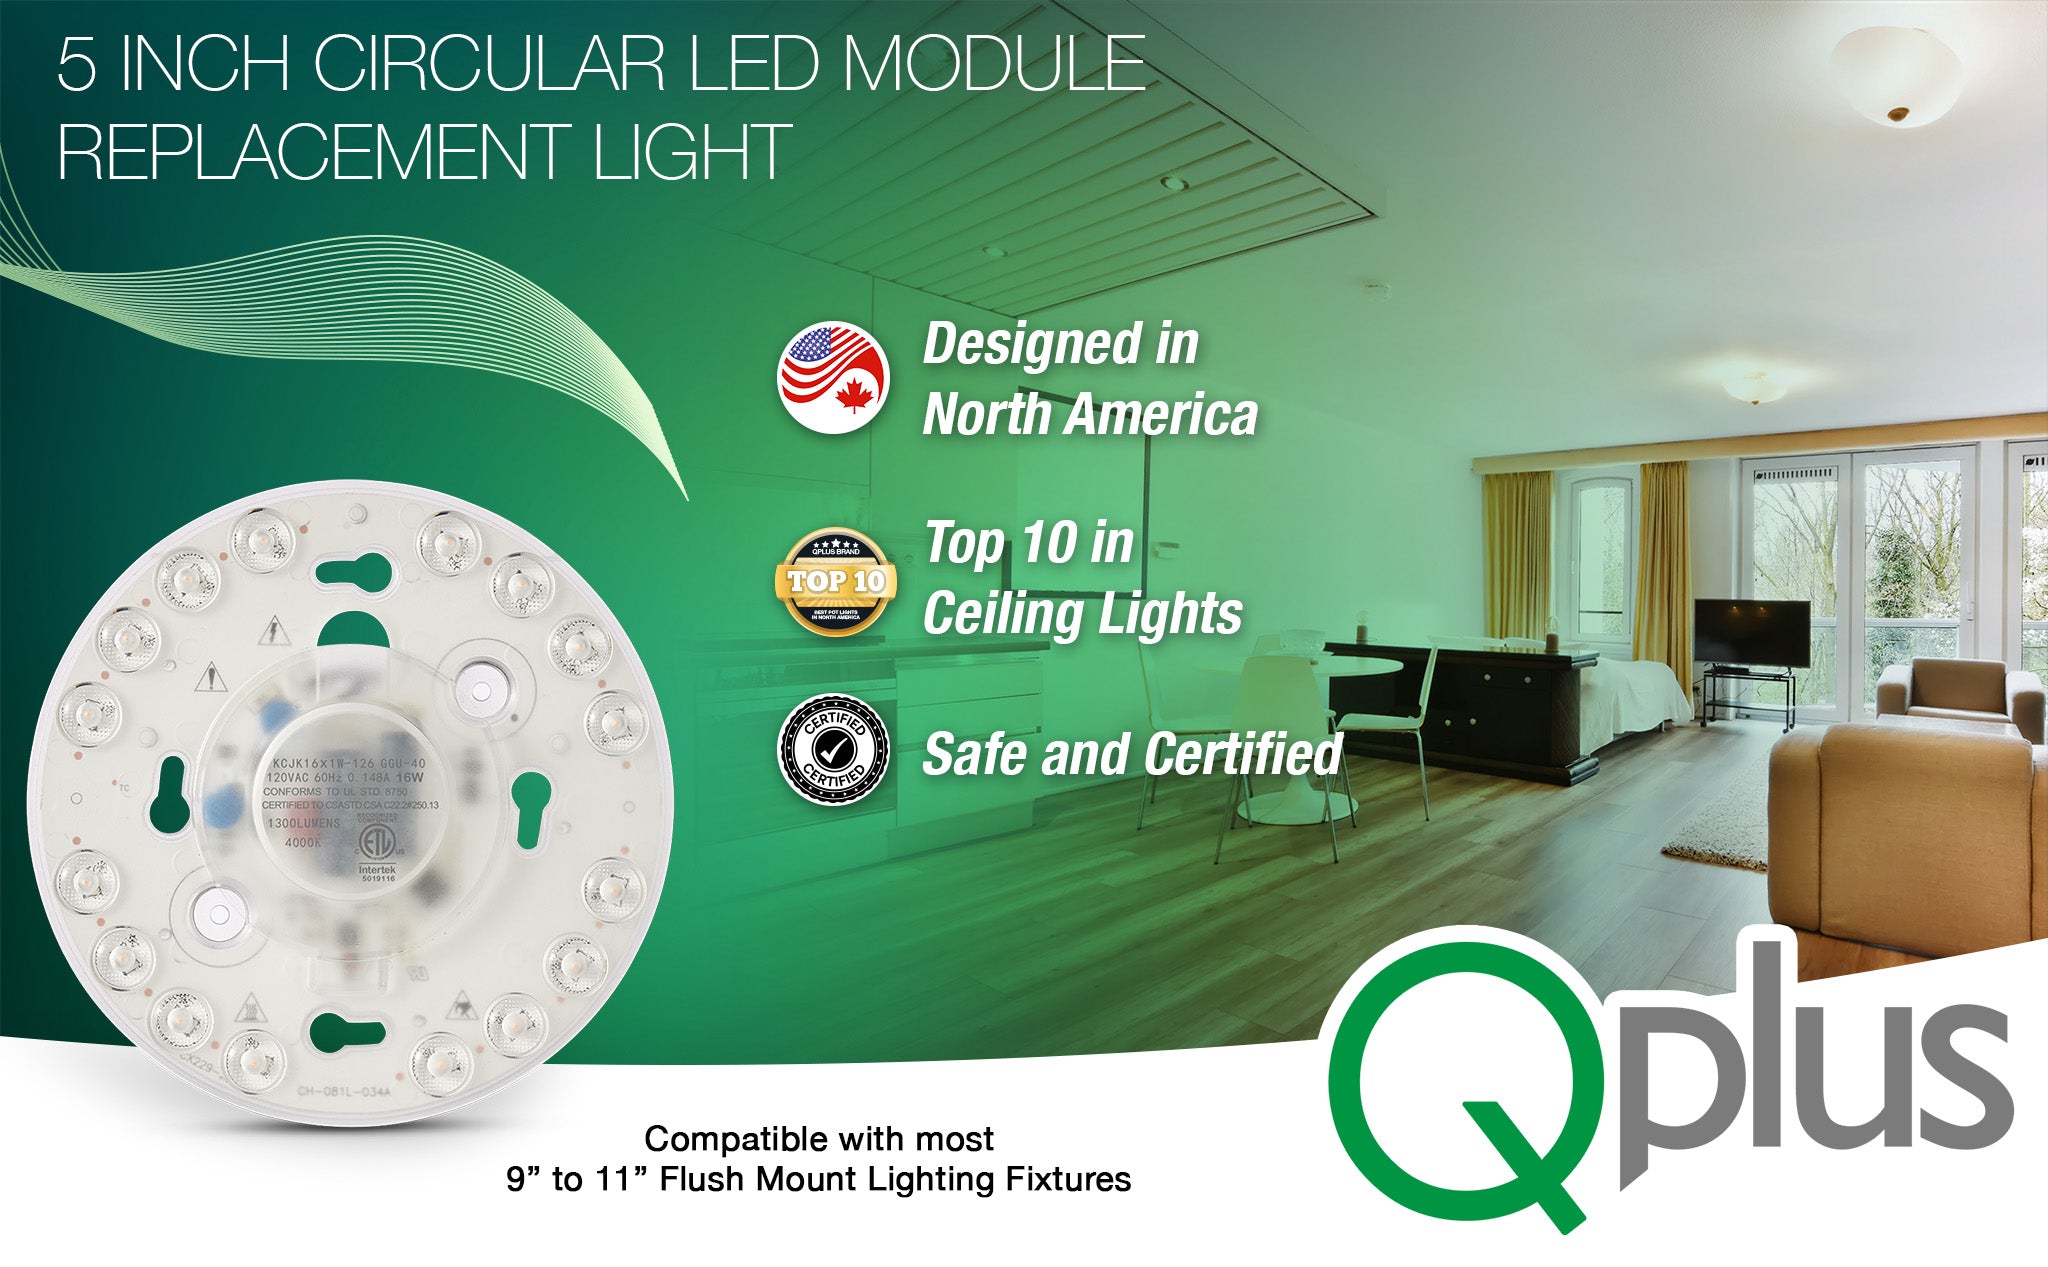 5 Inch Circular LED Module Replacement Light